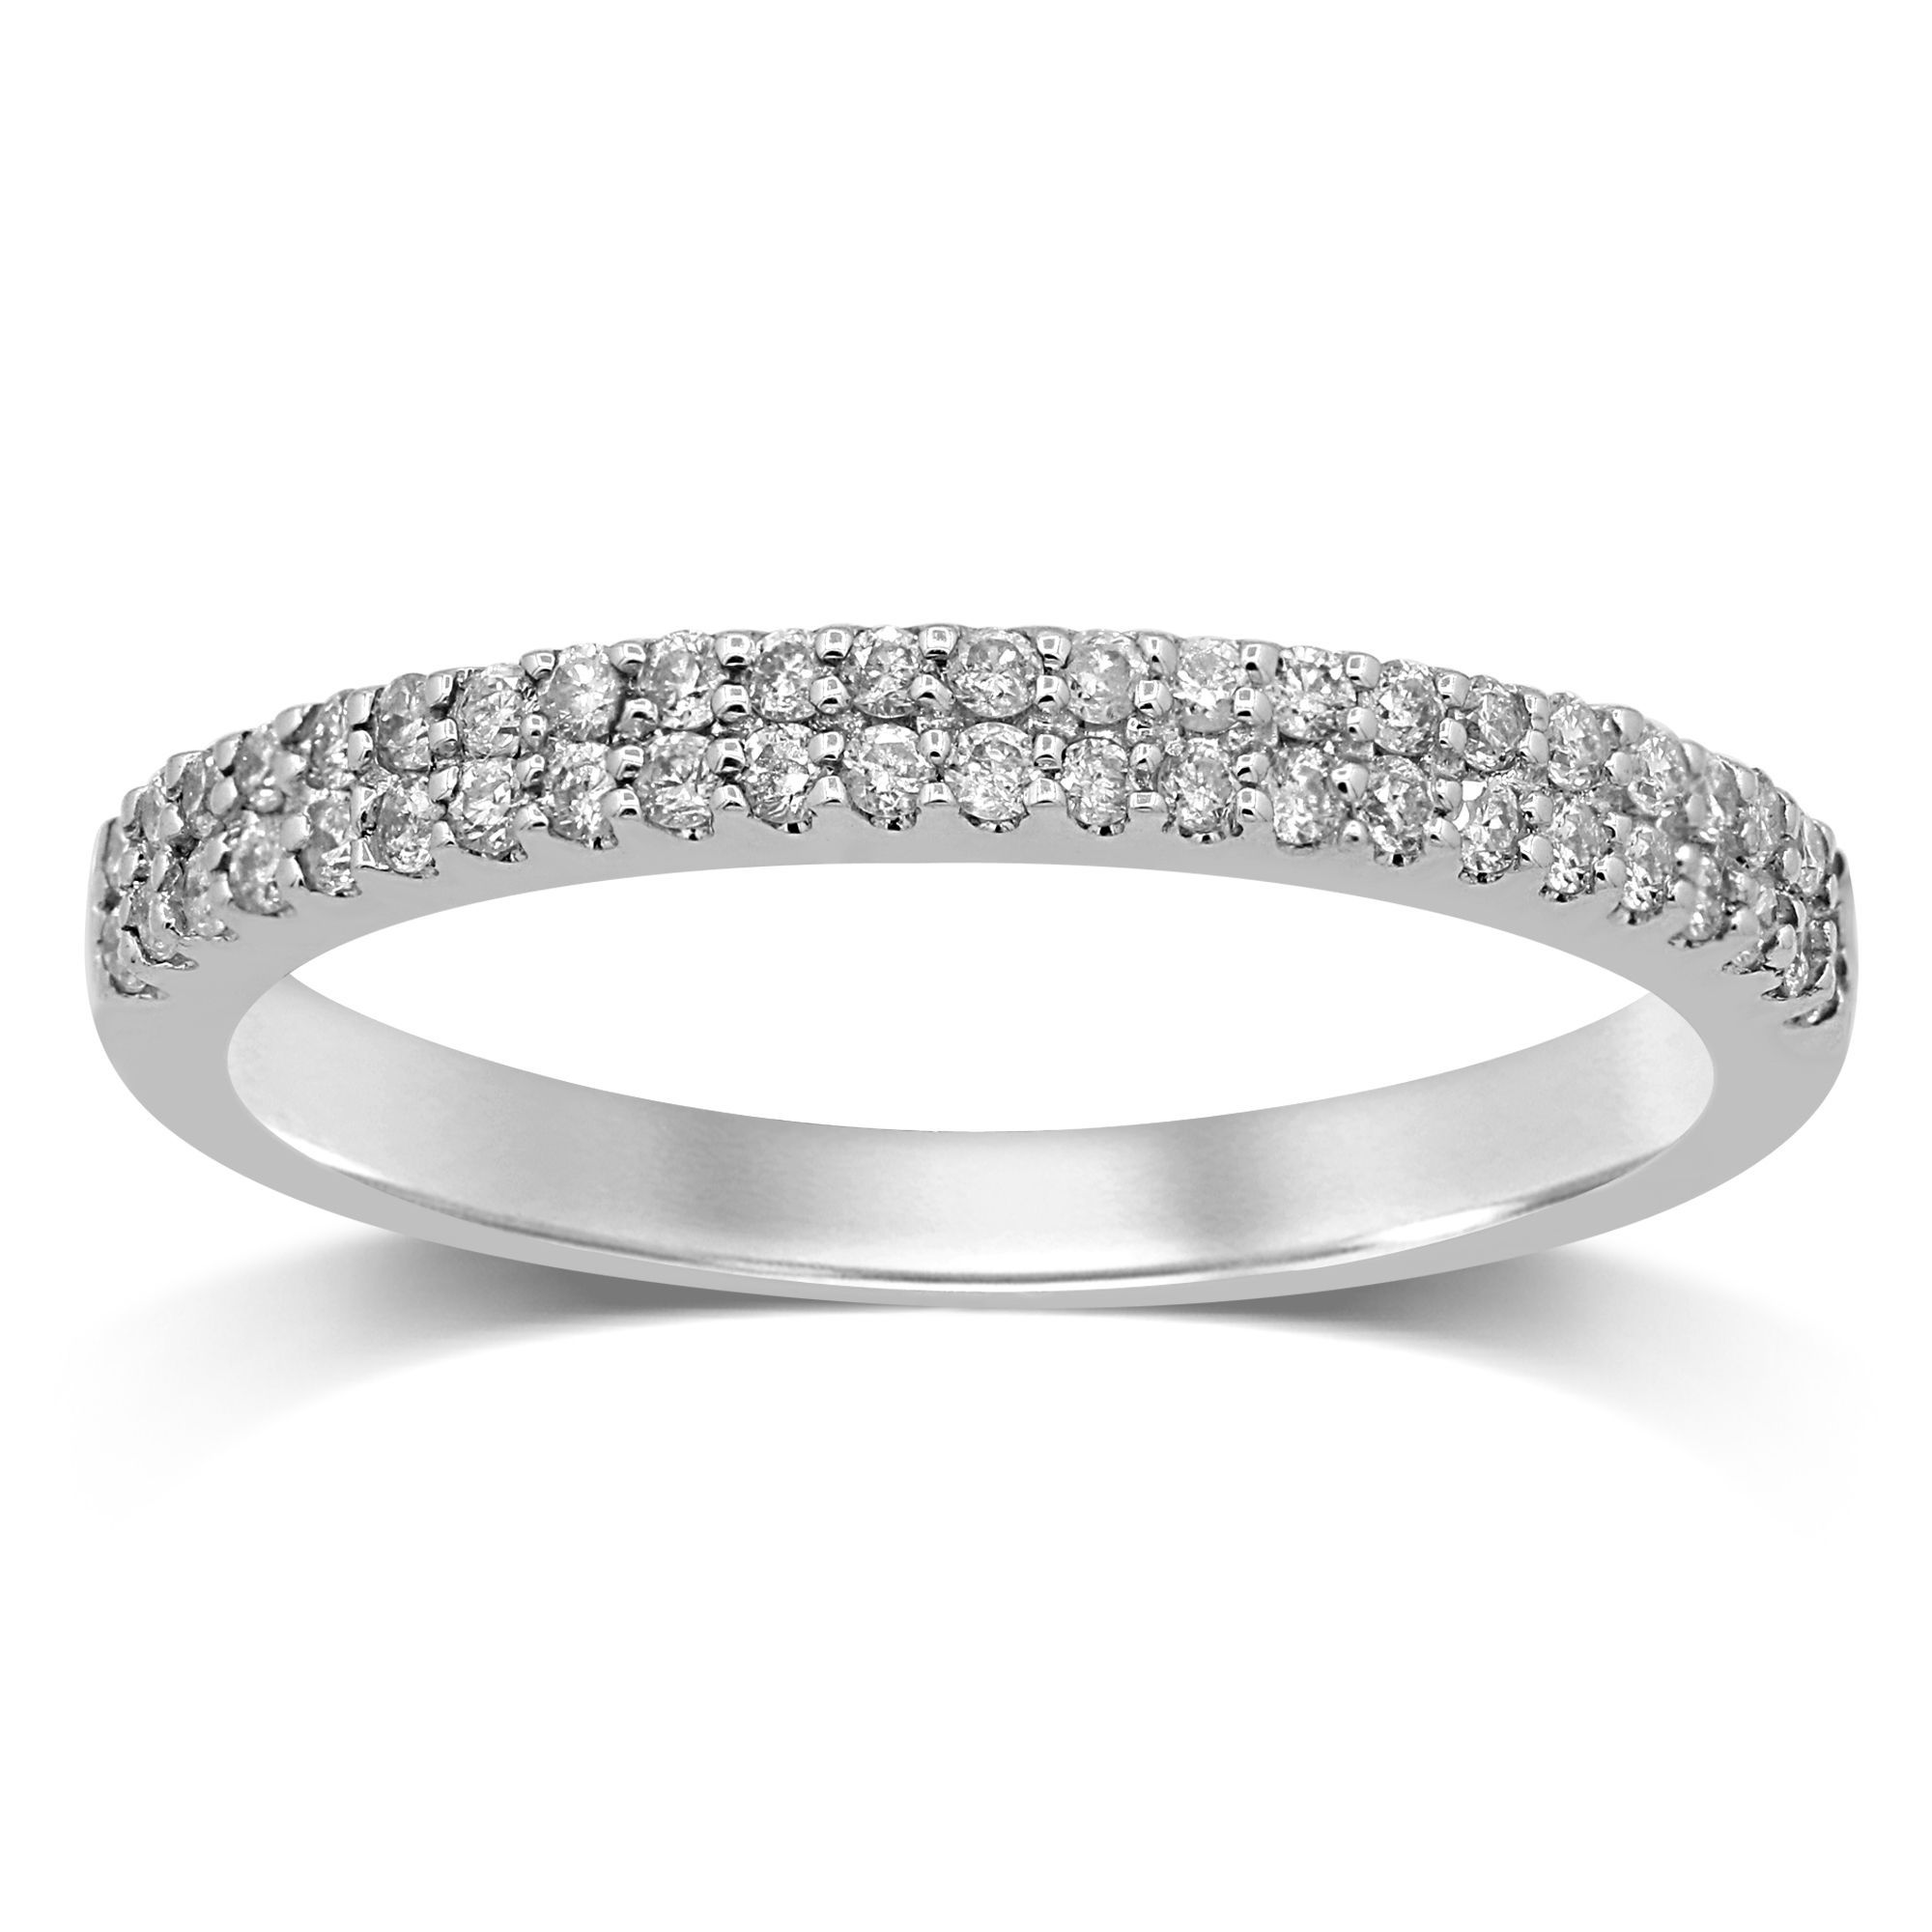 Double Row Ring with 1/4ct of Diamonds in 9ct White Gold Rings Bevilles 